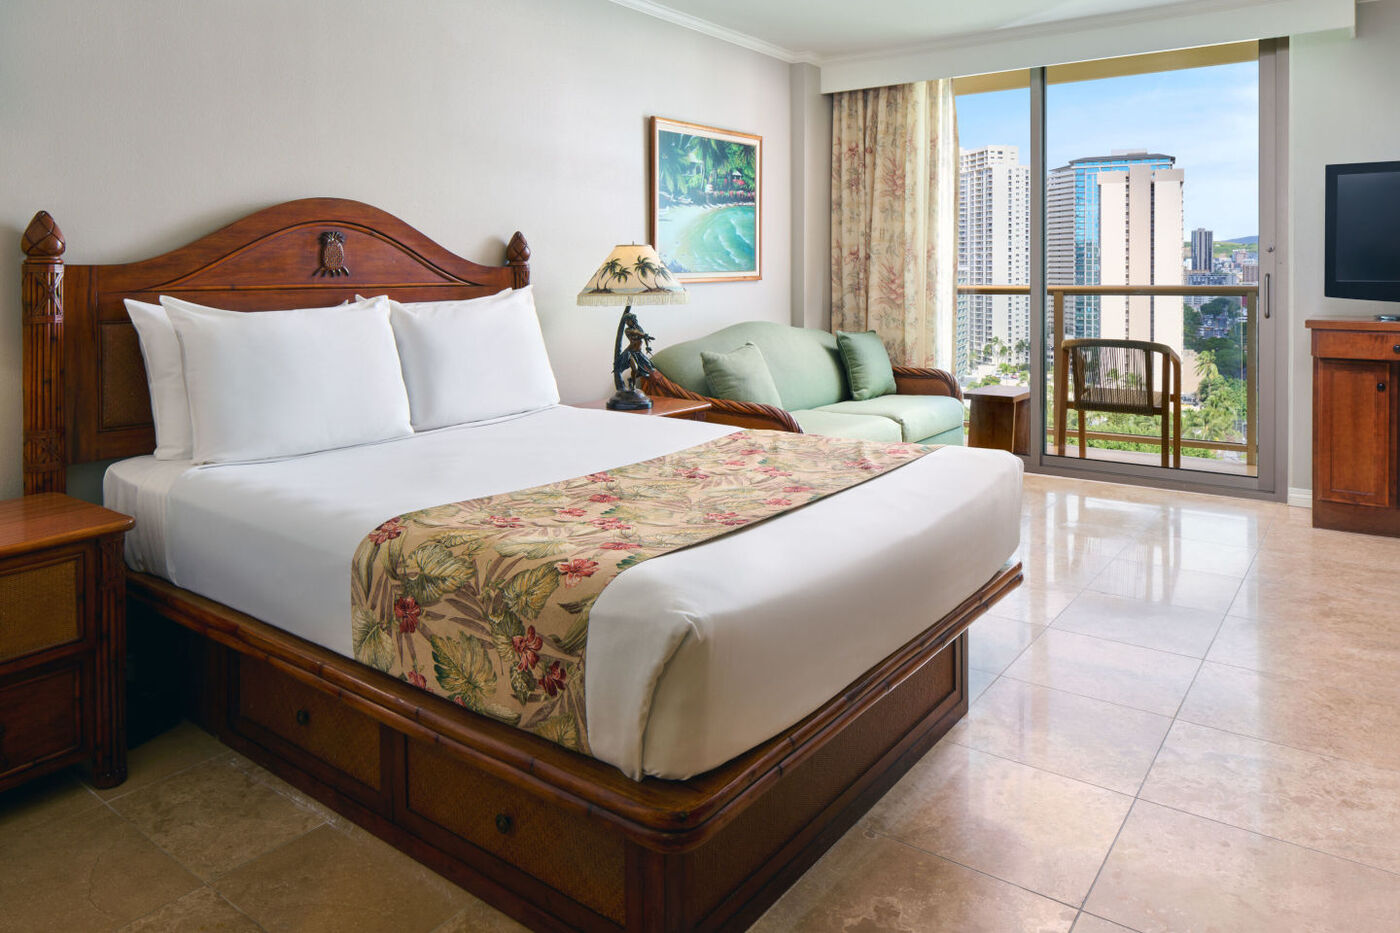 Luana Waikiki Hotel and Suites City View Room with a bed, a private balcony with a seating area the enjoy the views of the skyline.